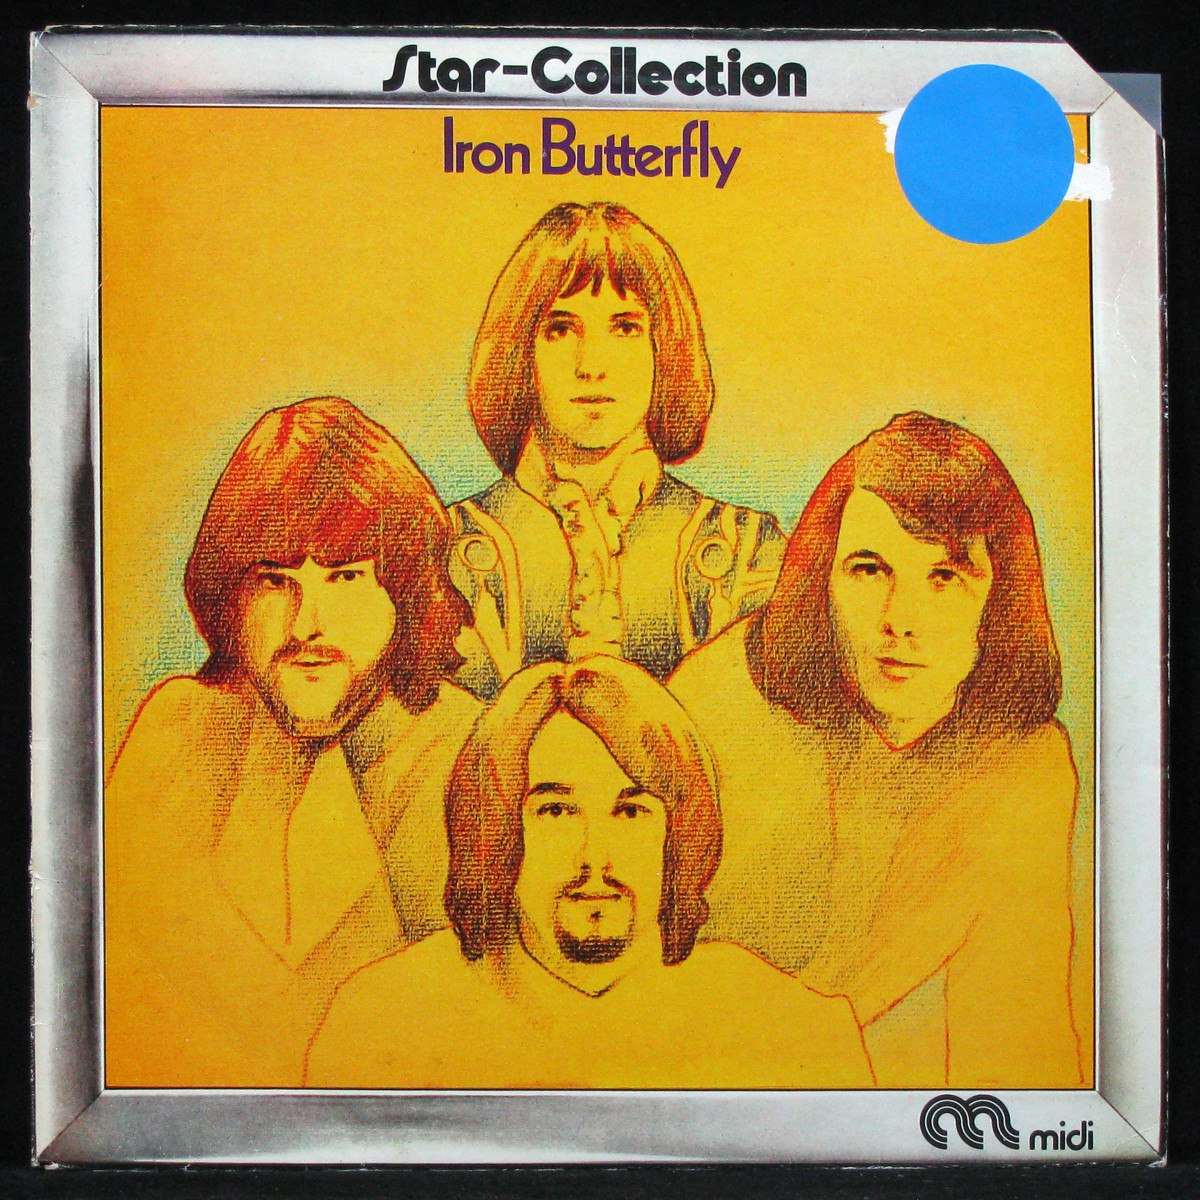 LP Iron Butterfly — Star-Collection фото